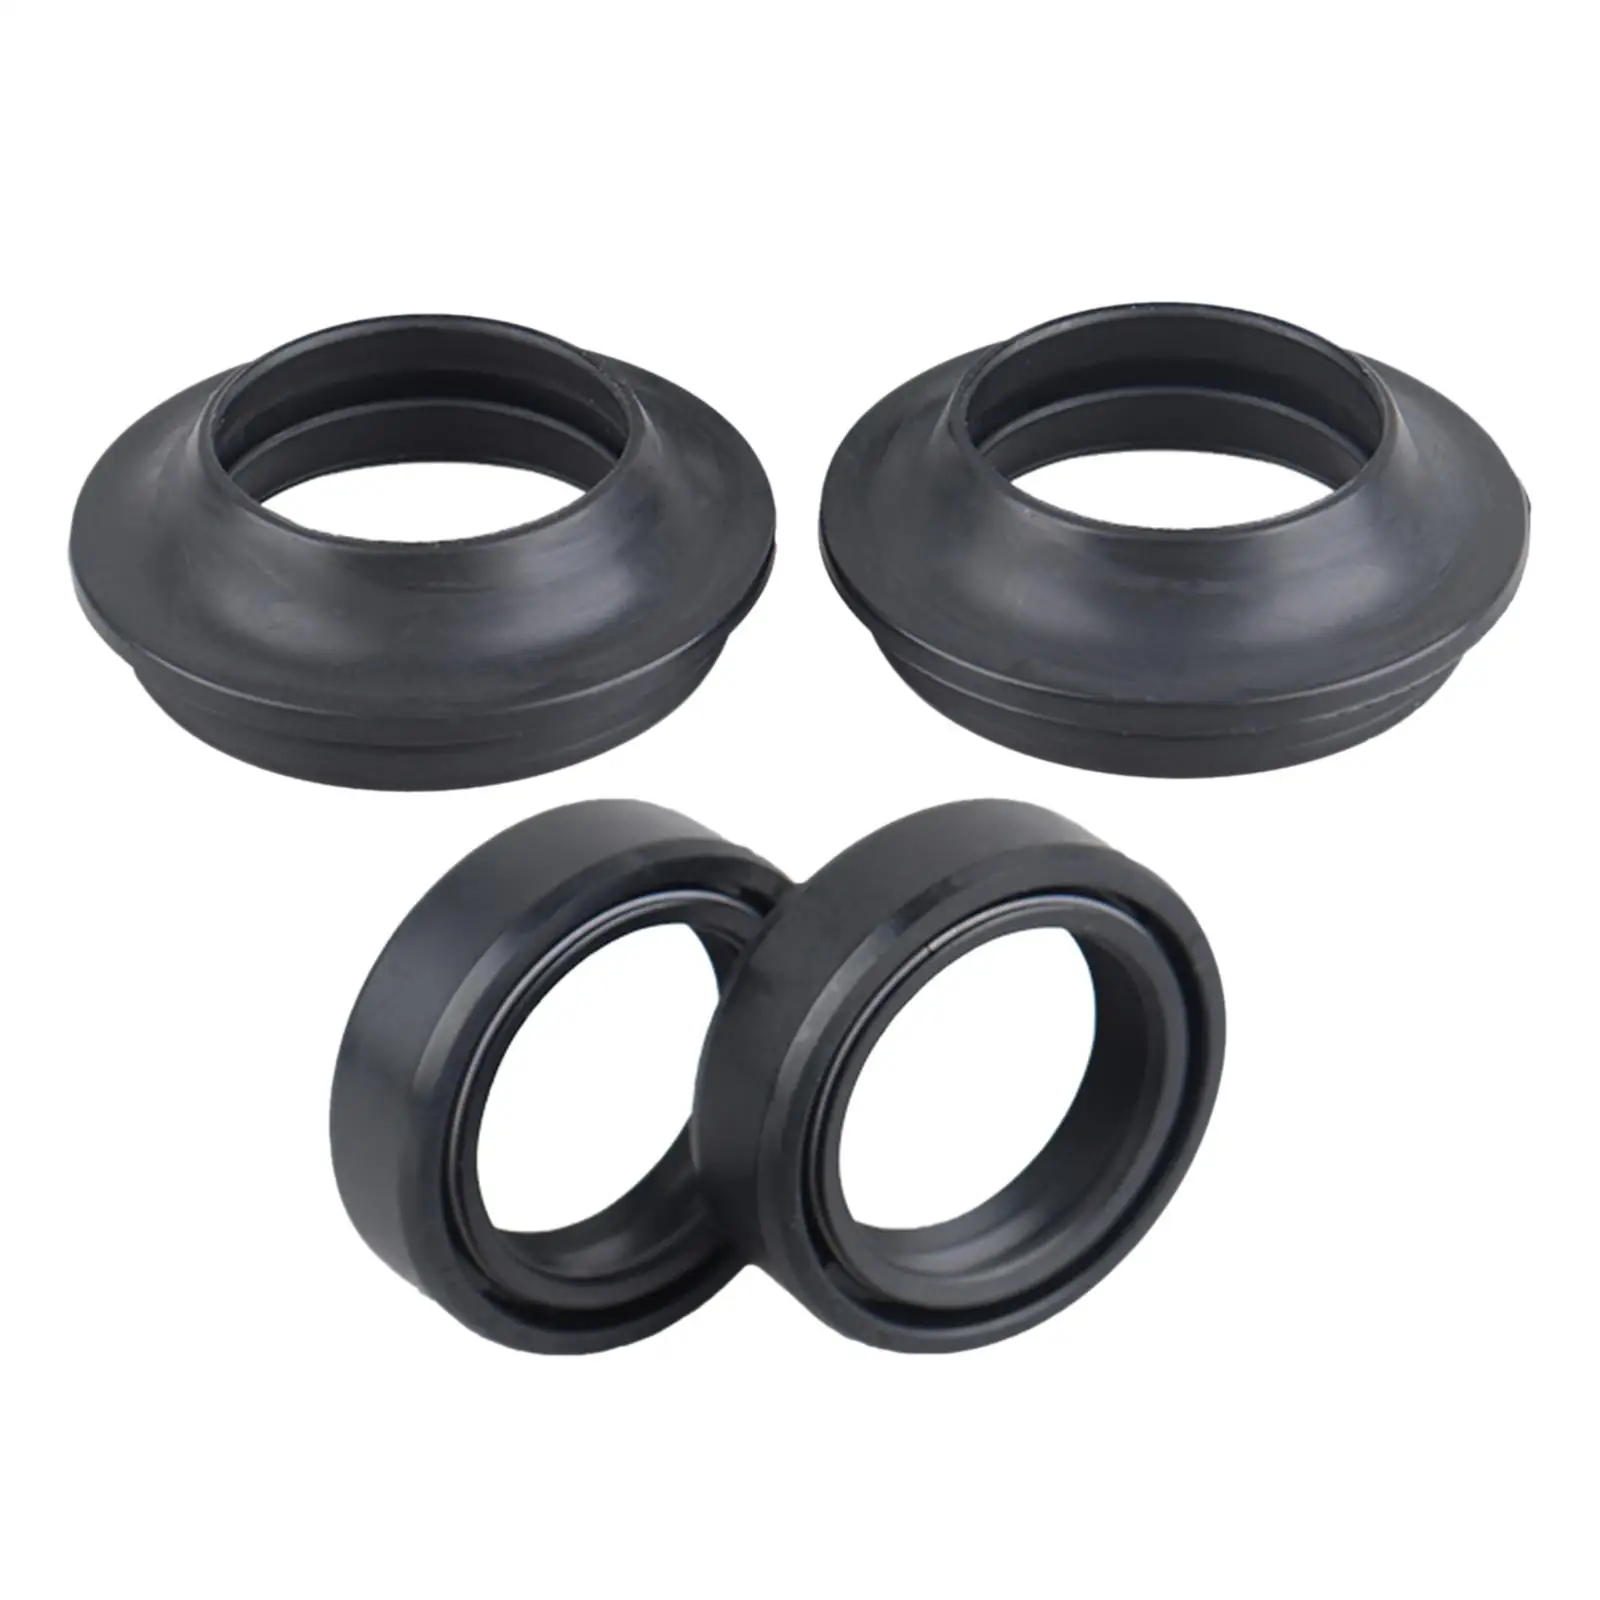 4 Pieces Oil and Dust Seal Motorcycle Accessories for Yamaha PW80 Ttr90